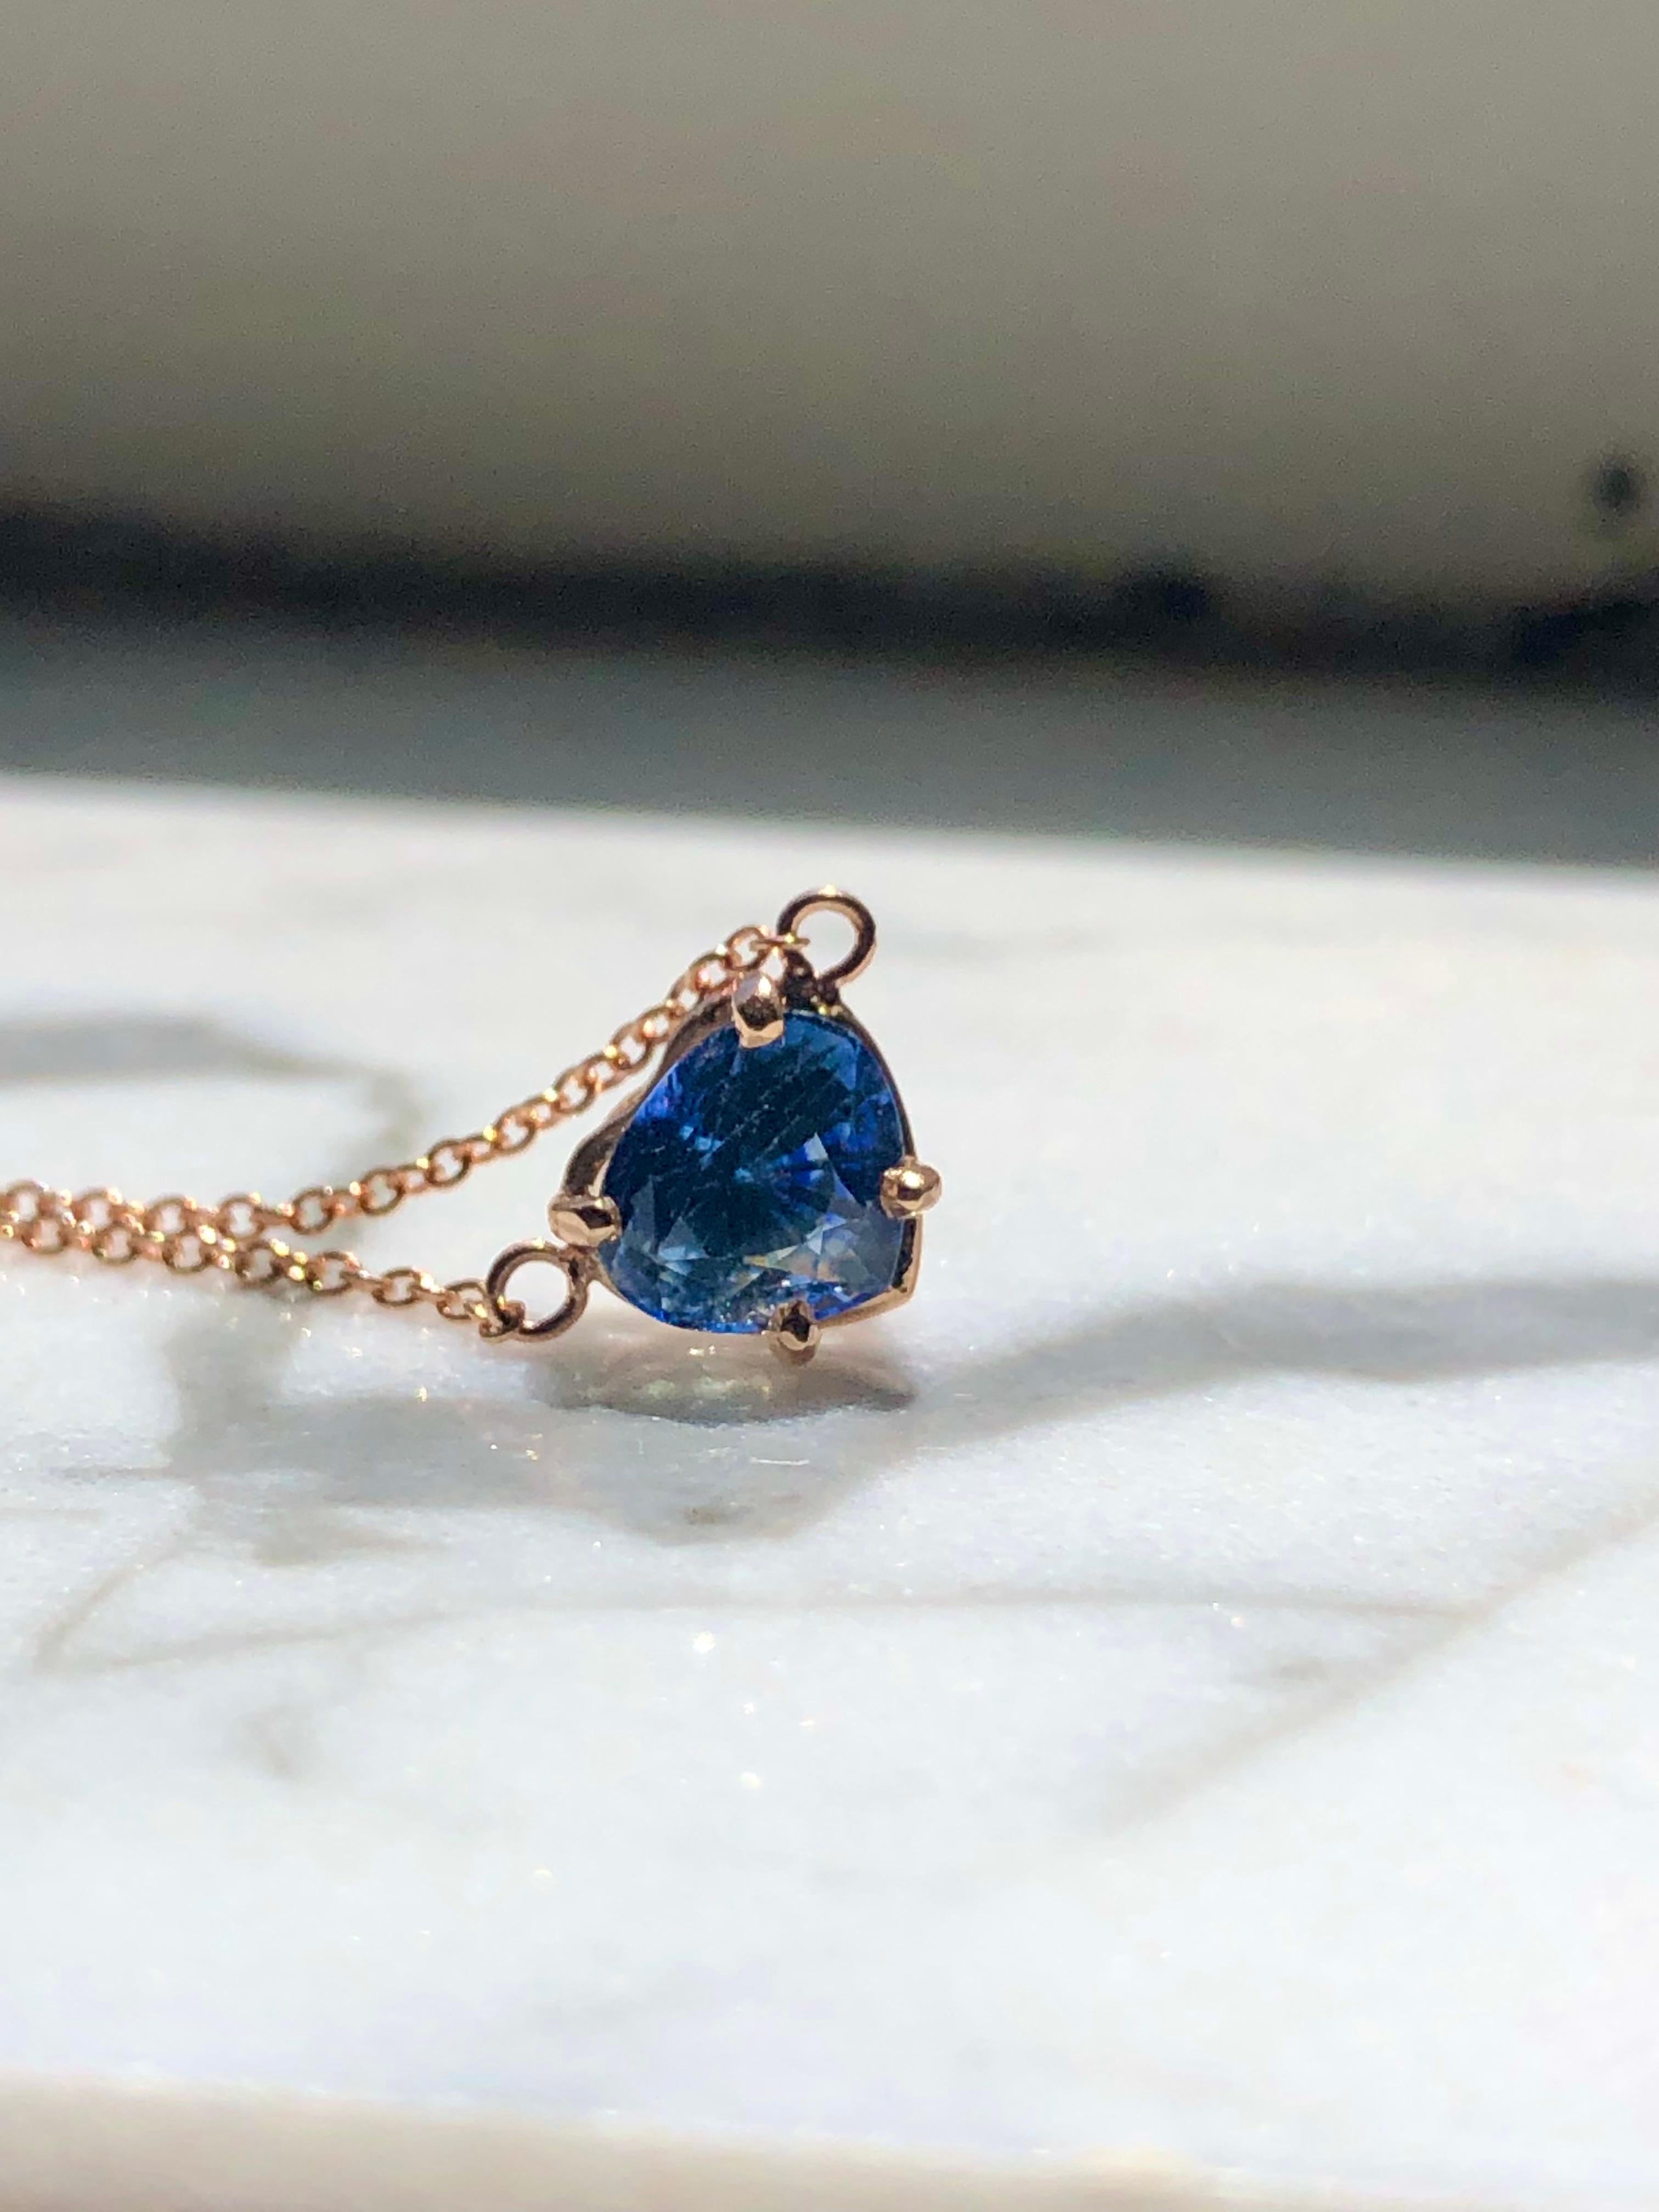 An estate vibrant blue heart shapes a natural Ceylon sapphire pendant necklace. 3.50-carat heart-shaped set pendant in 18k rose gold, the total length of the necklace is 18 inches. The Ceylon sapphire, which bears a colorless zoning(see pictures),